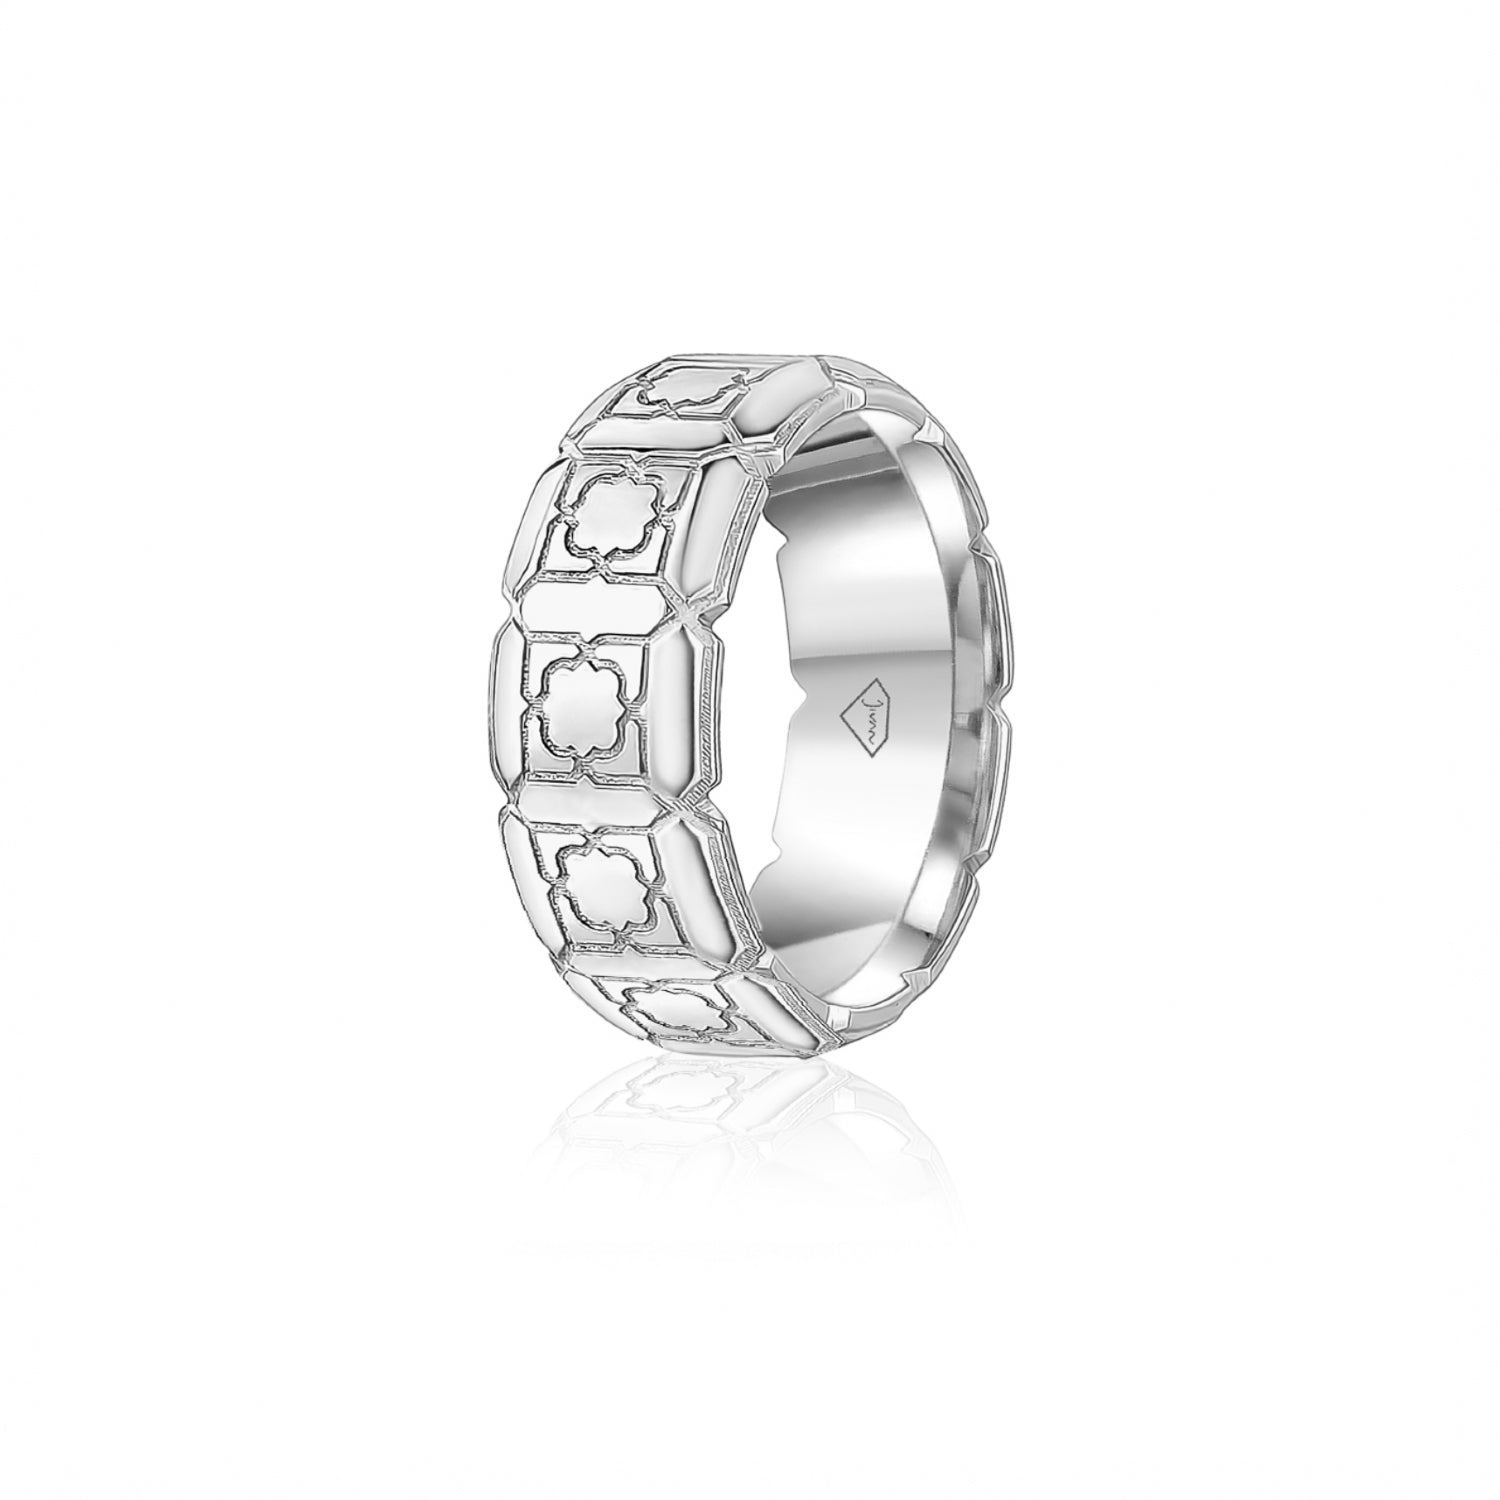 Engraved Motif Polished Finish Standard Fit 8-9 mm Wedding Band in White Gold